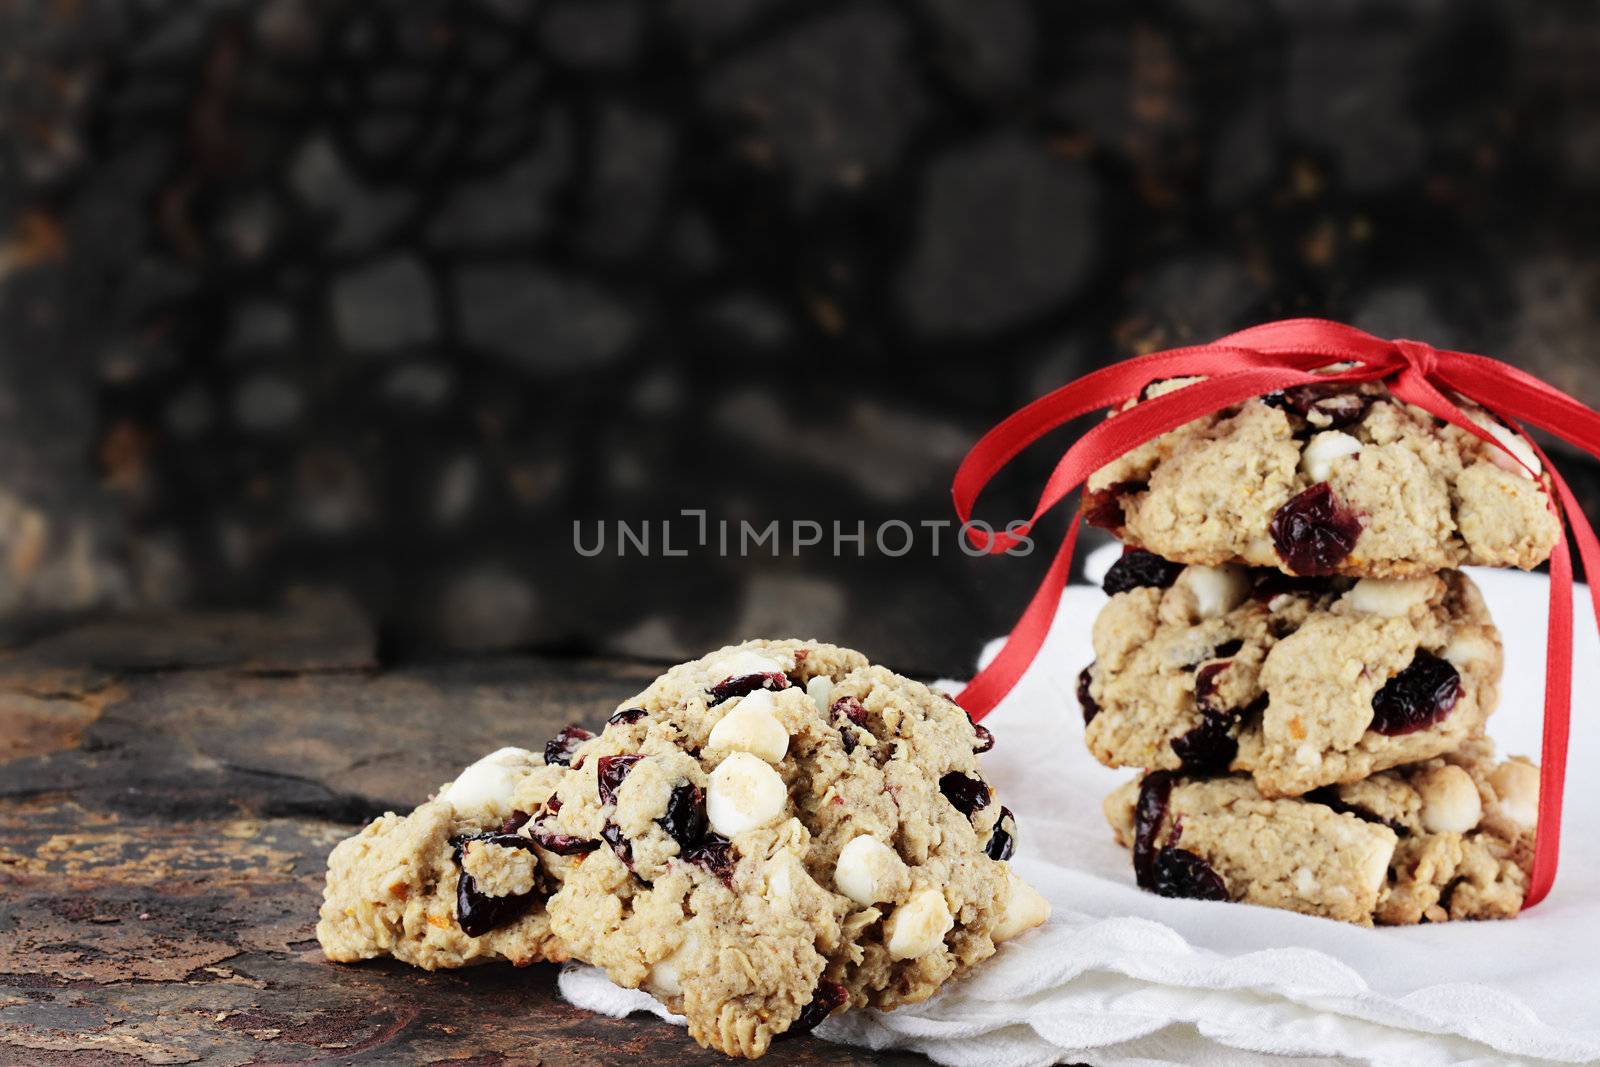 Cranberry, oats and white chocolate chip cookies over a rustic background.
